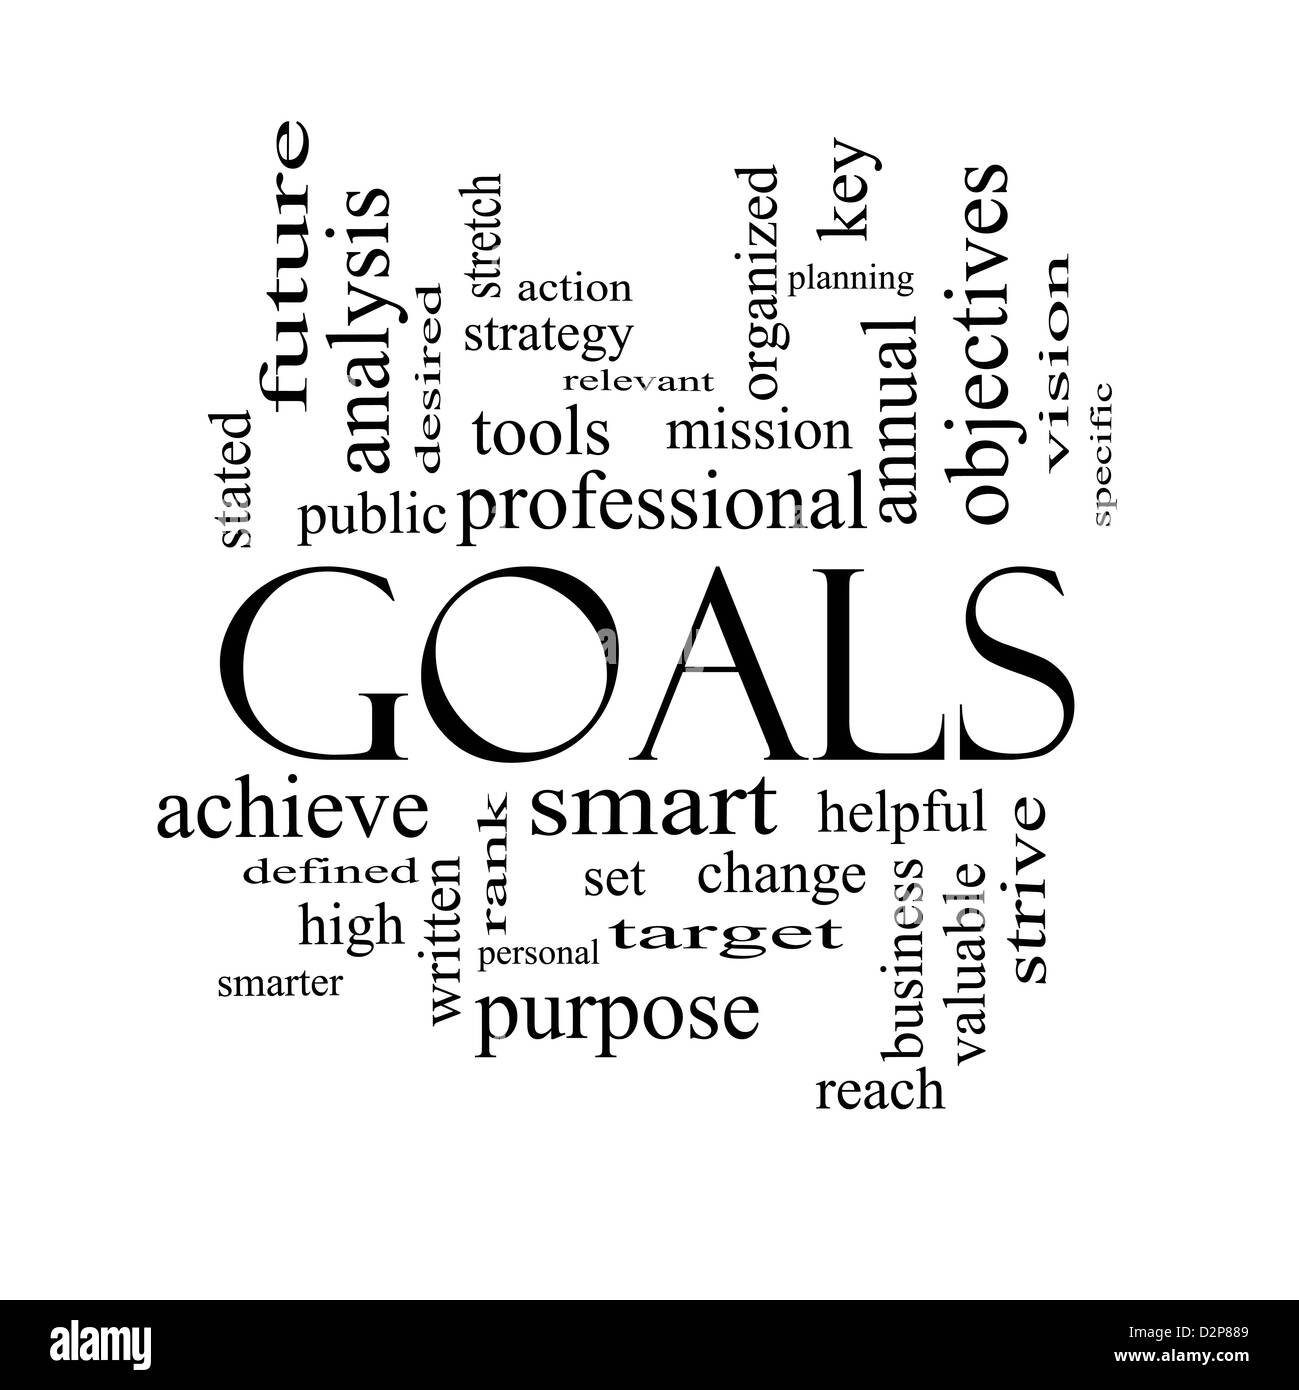 Goals Word Cloud Concept in black and white with great terms such as planning, missions, smart, set, high and more. Stock Photo